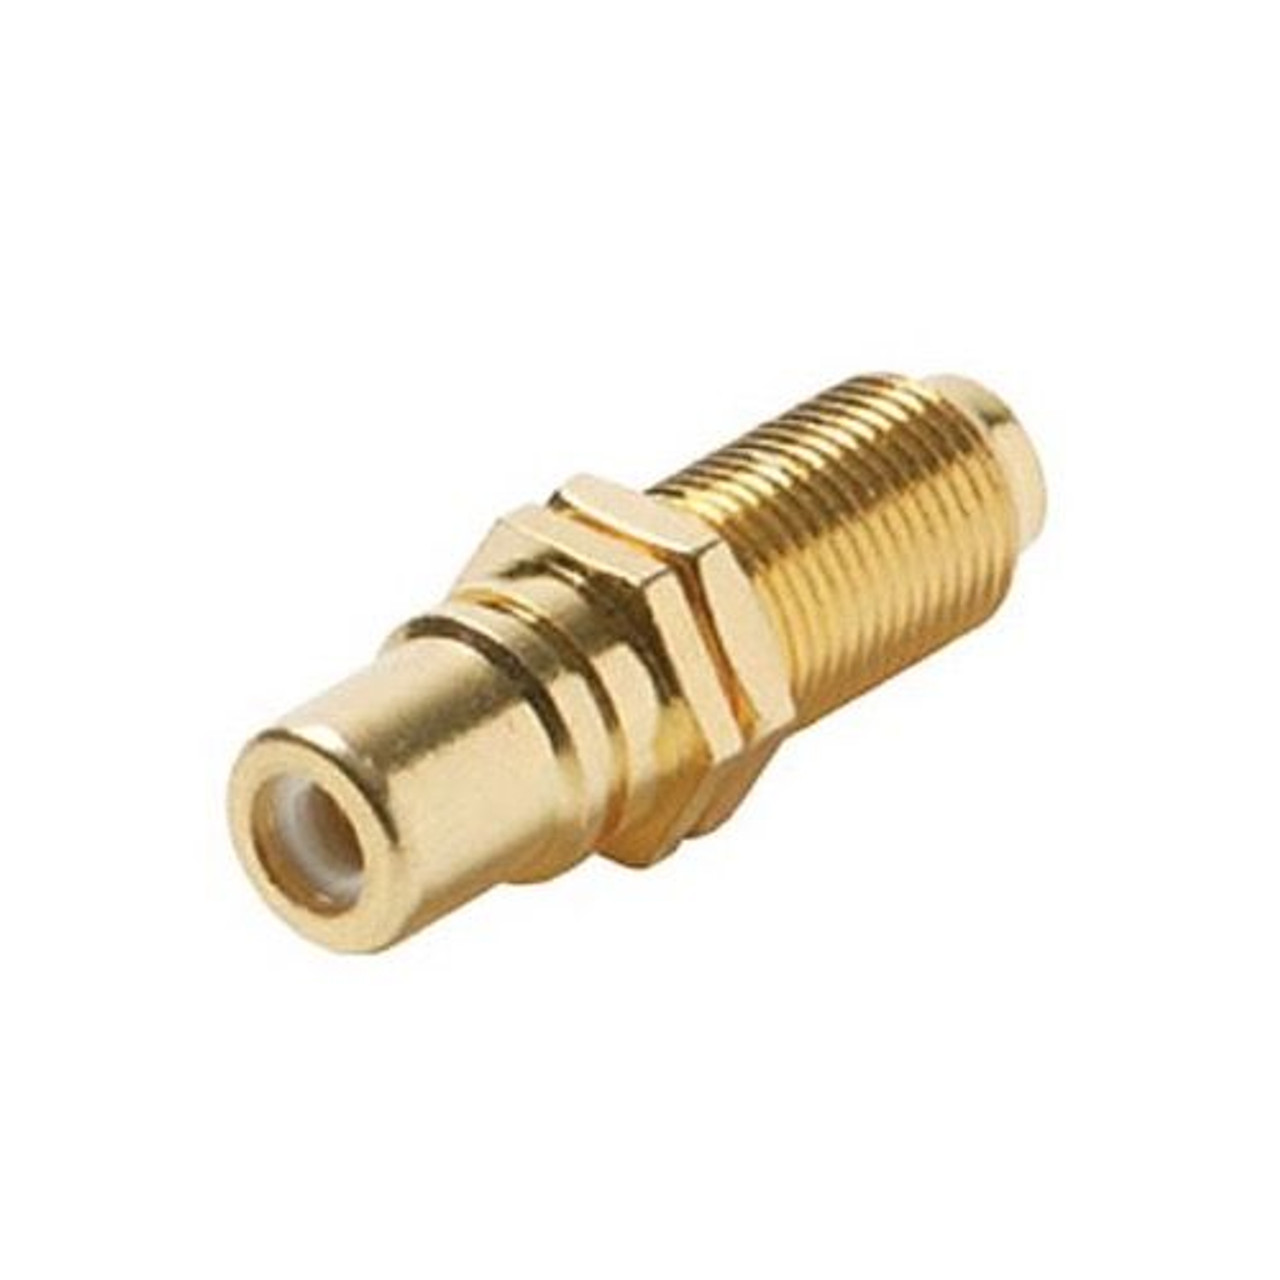 Steren 251-508 Single F to RCA Female Coupler WHITE BAND Gold Plate Adapter Connector Insert Wall Plate Coaxial to RCA Female Plug Jack 1 Component Connector, Part # 251-508